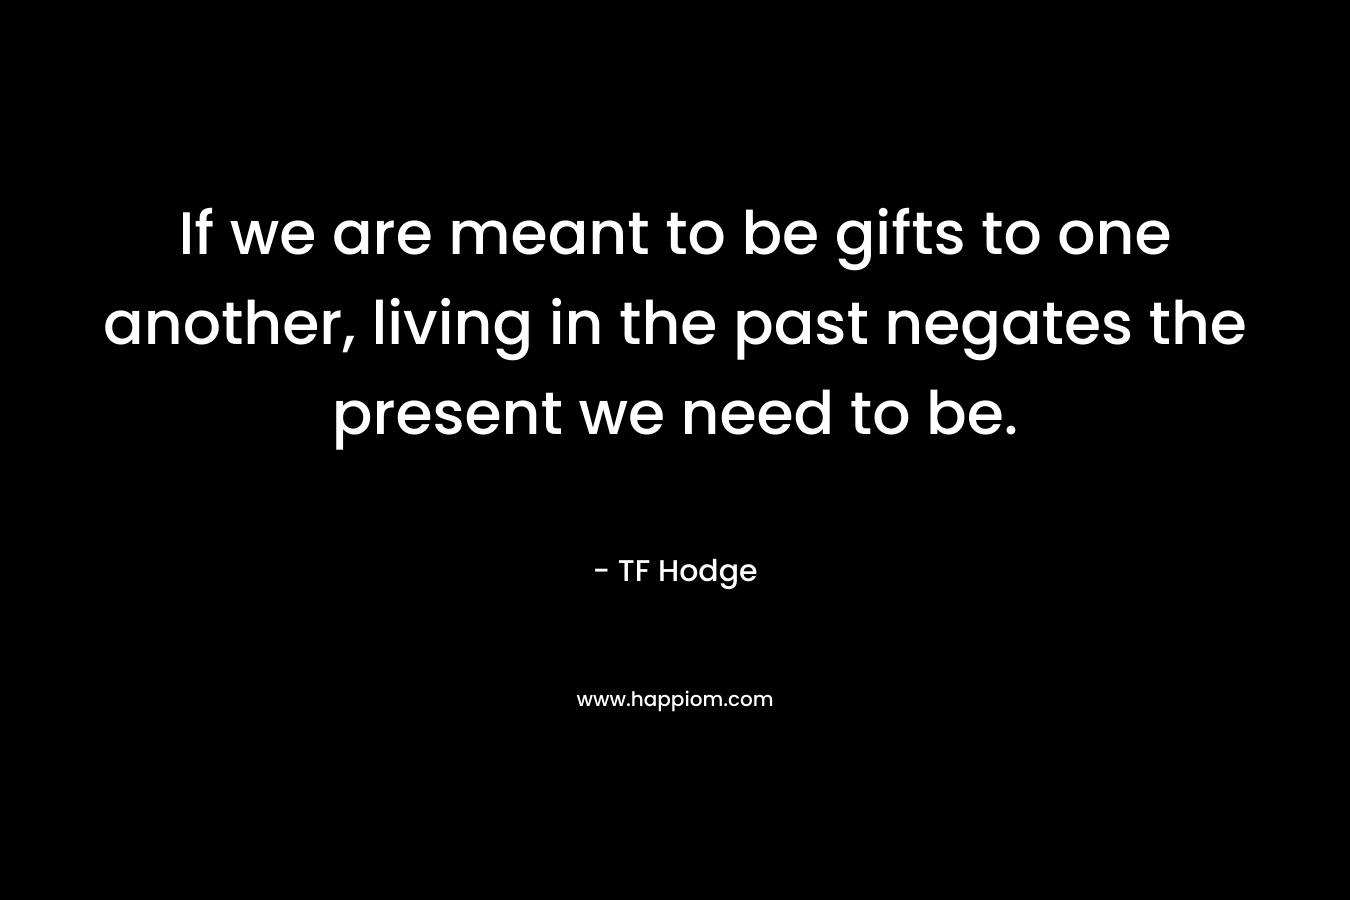 If we are meant to be gifts to one another, living in the past negates the present we need to be.